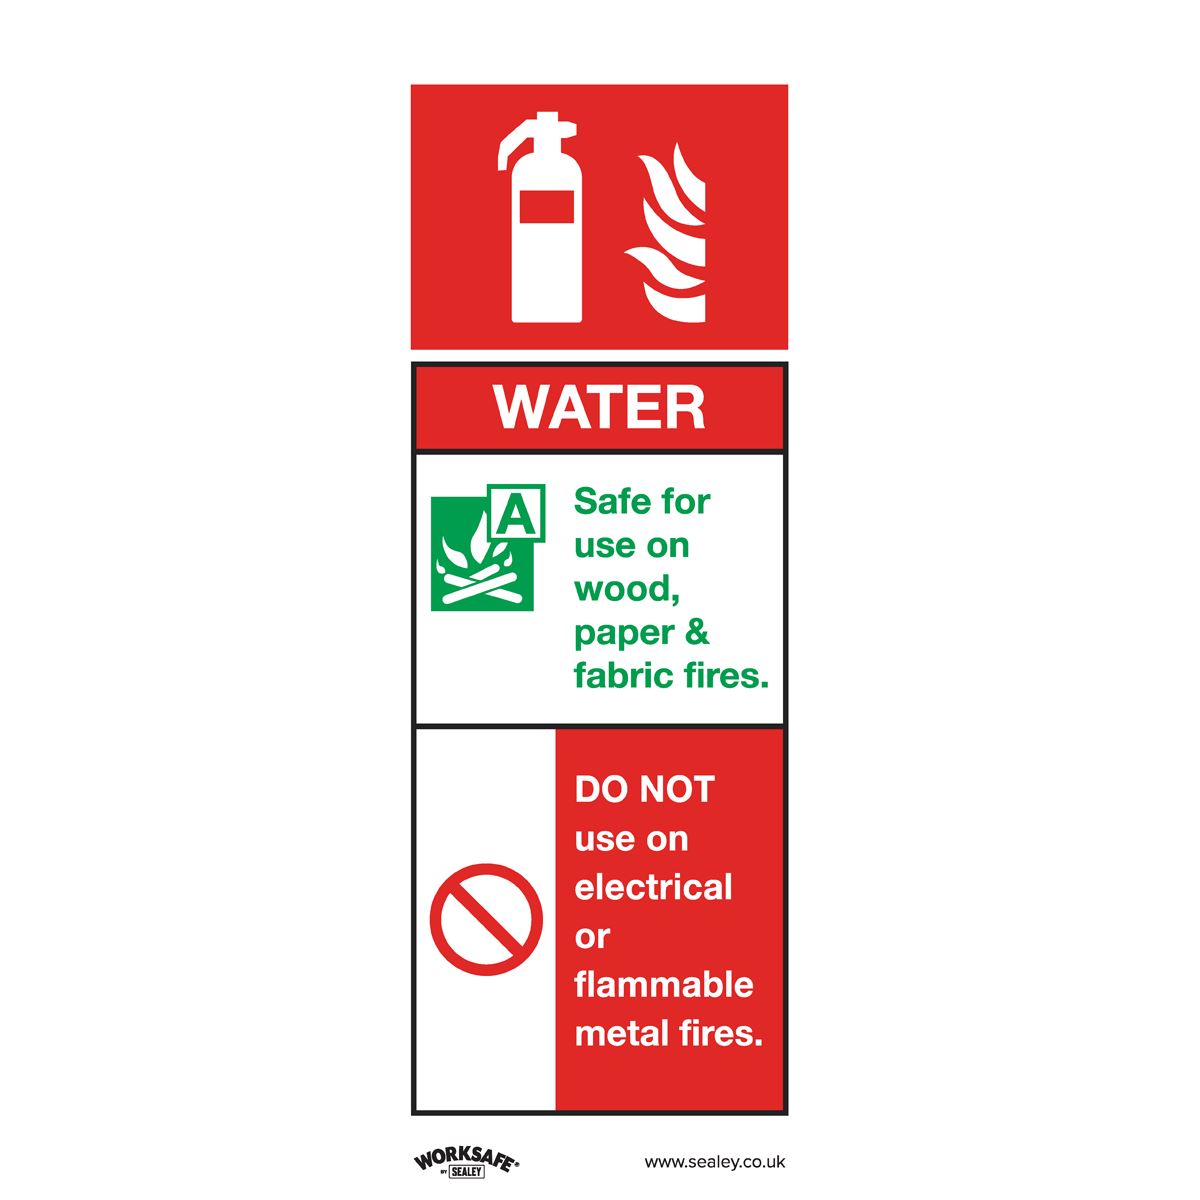 Worksafe by Sealey Safe Conditions Safety Sign - Water Fire Extinguisher - Self-Adhesive Vinyl